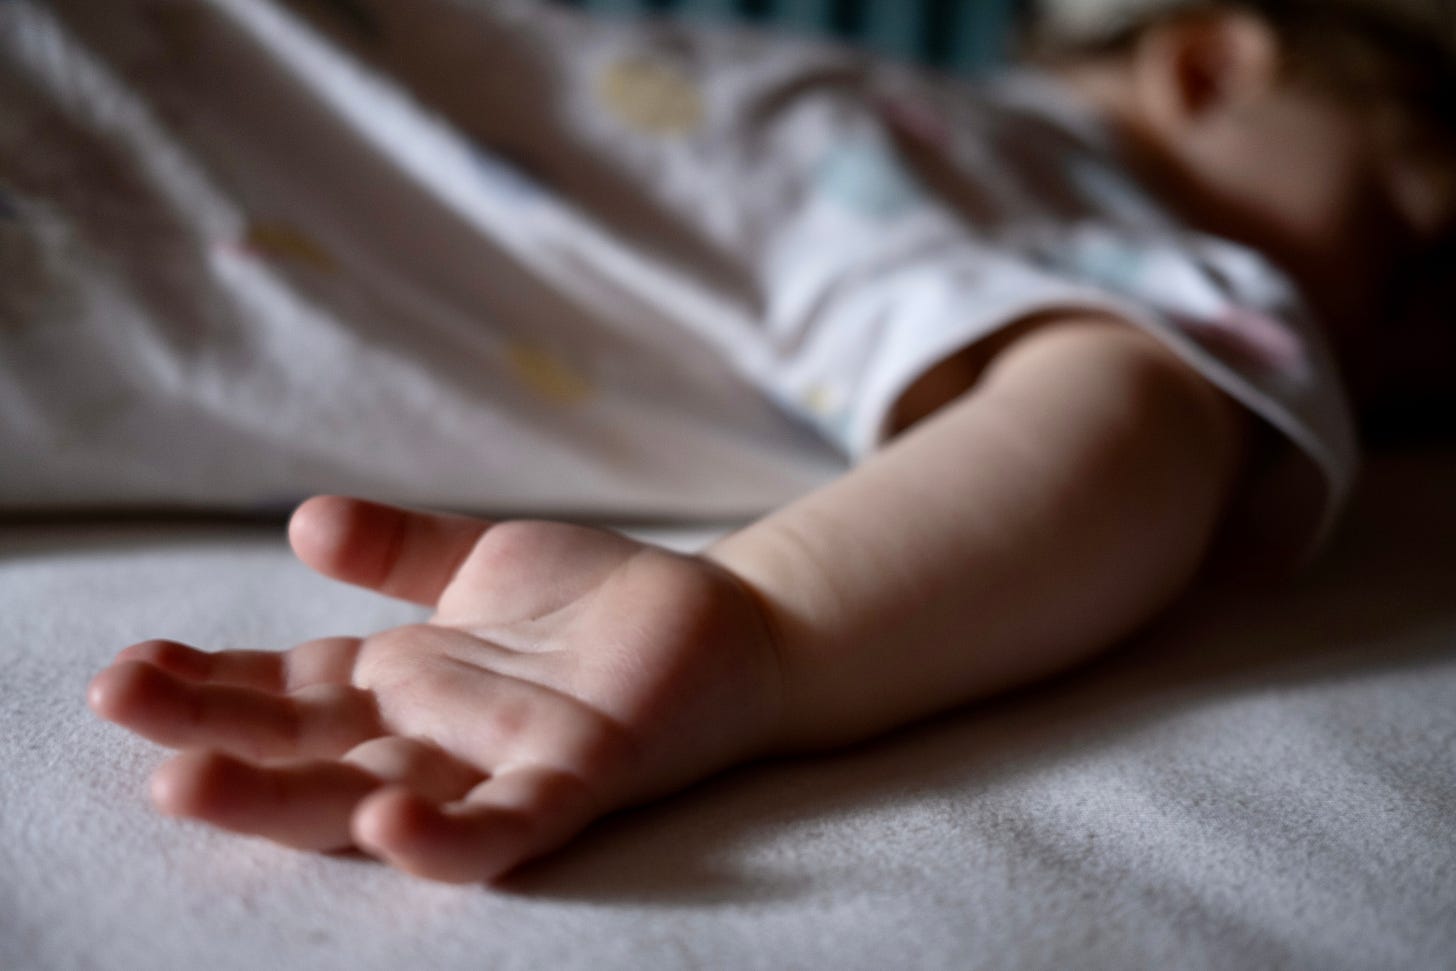 An out-of-focus child asleep, with a hand in the foreground.